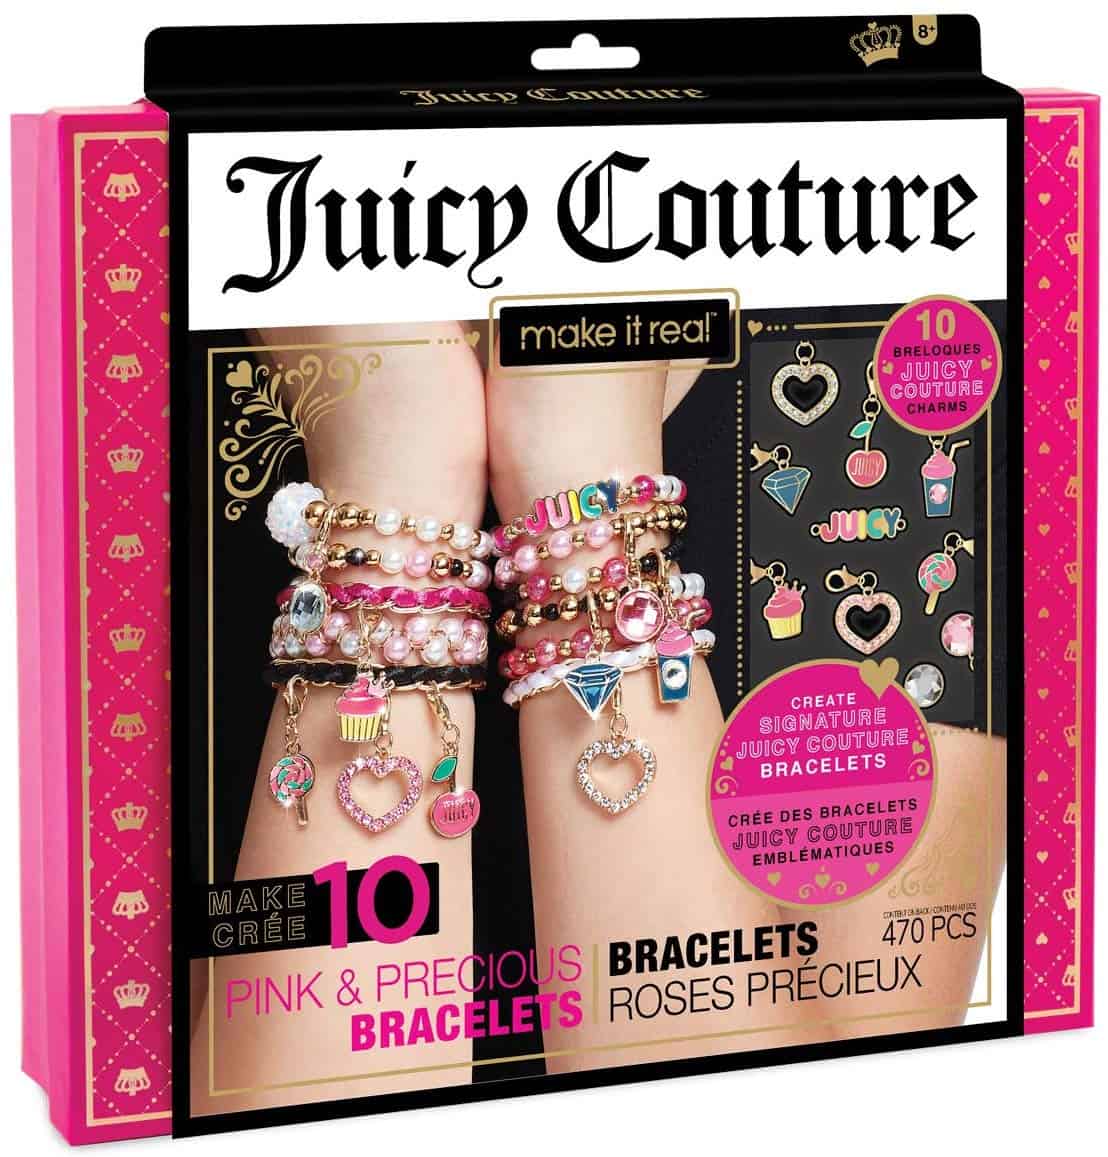 Make it real juicy couture pink and precious bracelets